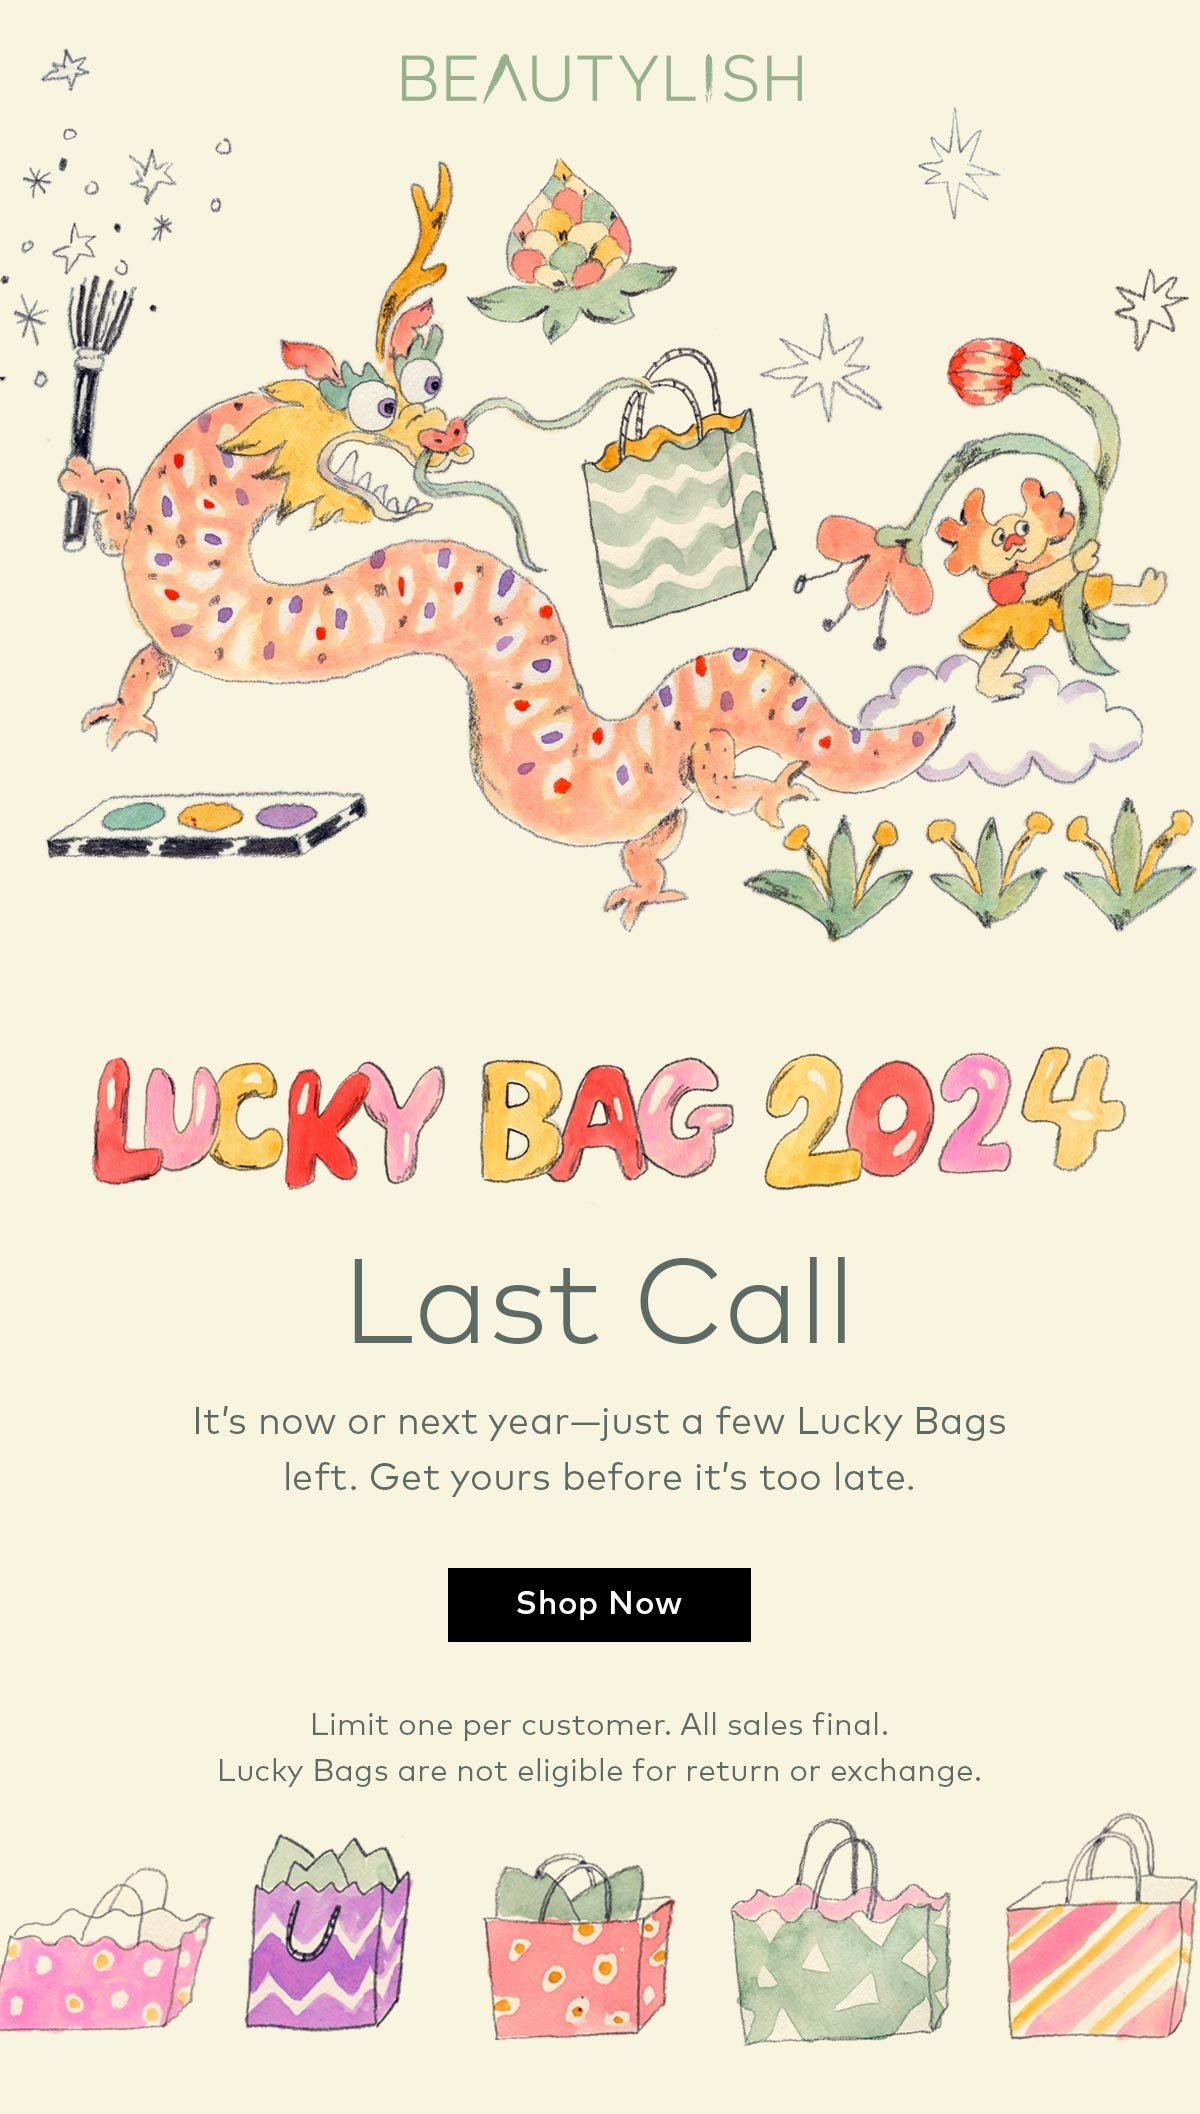 Lucky Bags are almost gone. Get yours here at Beautylish before they sell out!